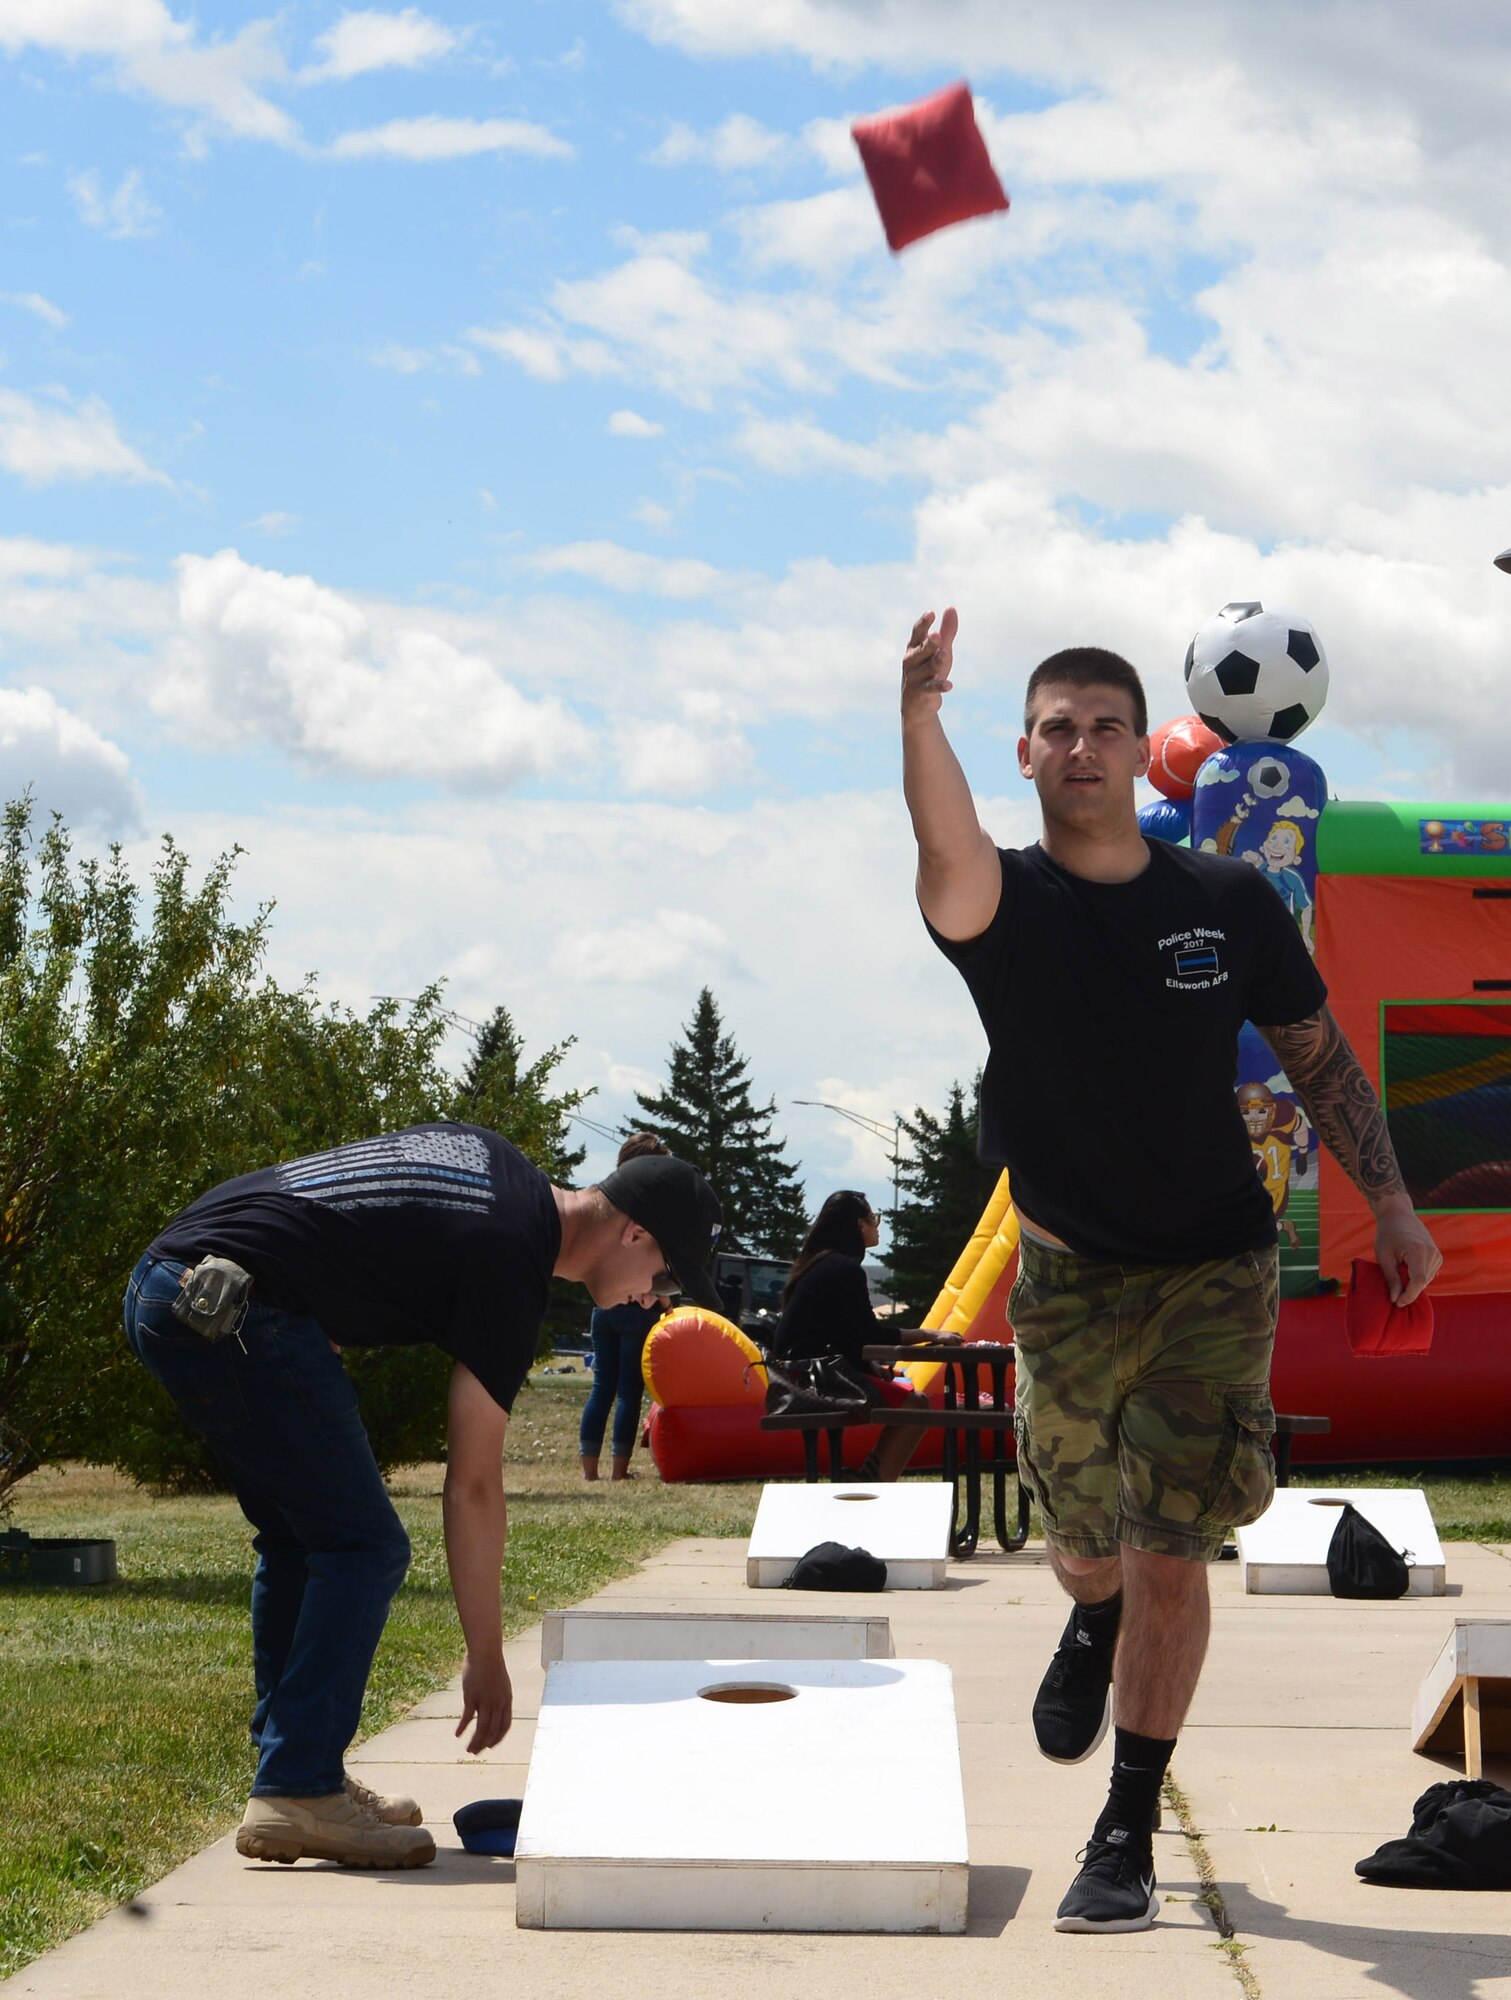 Airmen play a game of bean bag toss during the annual base picnic at Ellsworth Air Force Base, S.D., June 30, 2017. The event included a variety of activities for Airmen and their families to participate in including paintball, bubble soccer and bounce houses for children. (U.S. Air Force photo by Airman 1st Class Donald C. Knechtel)